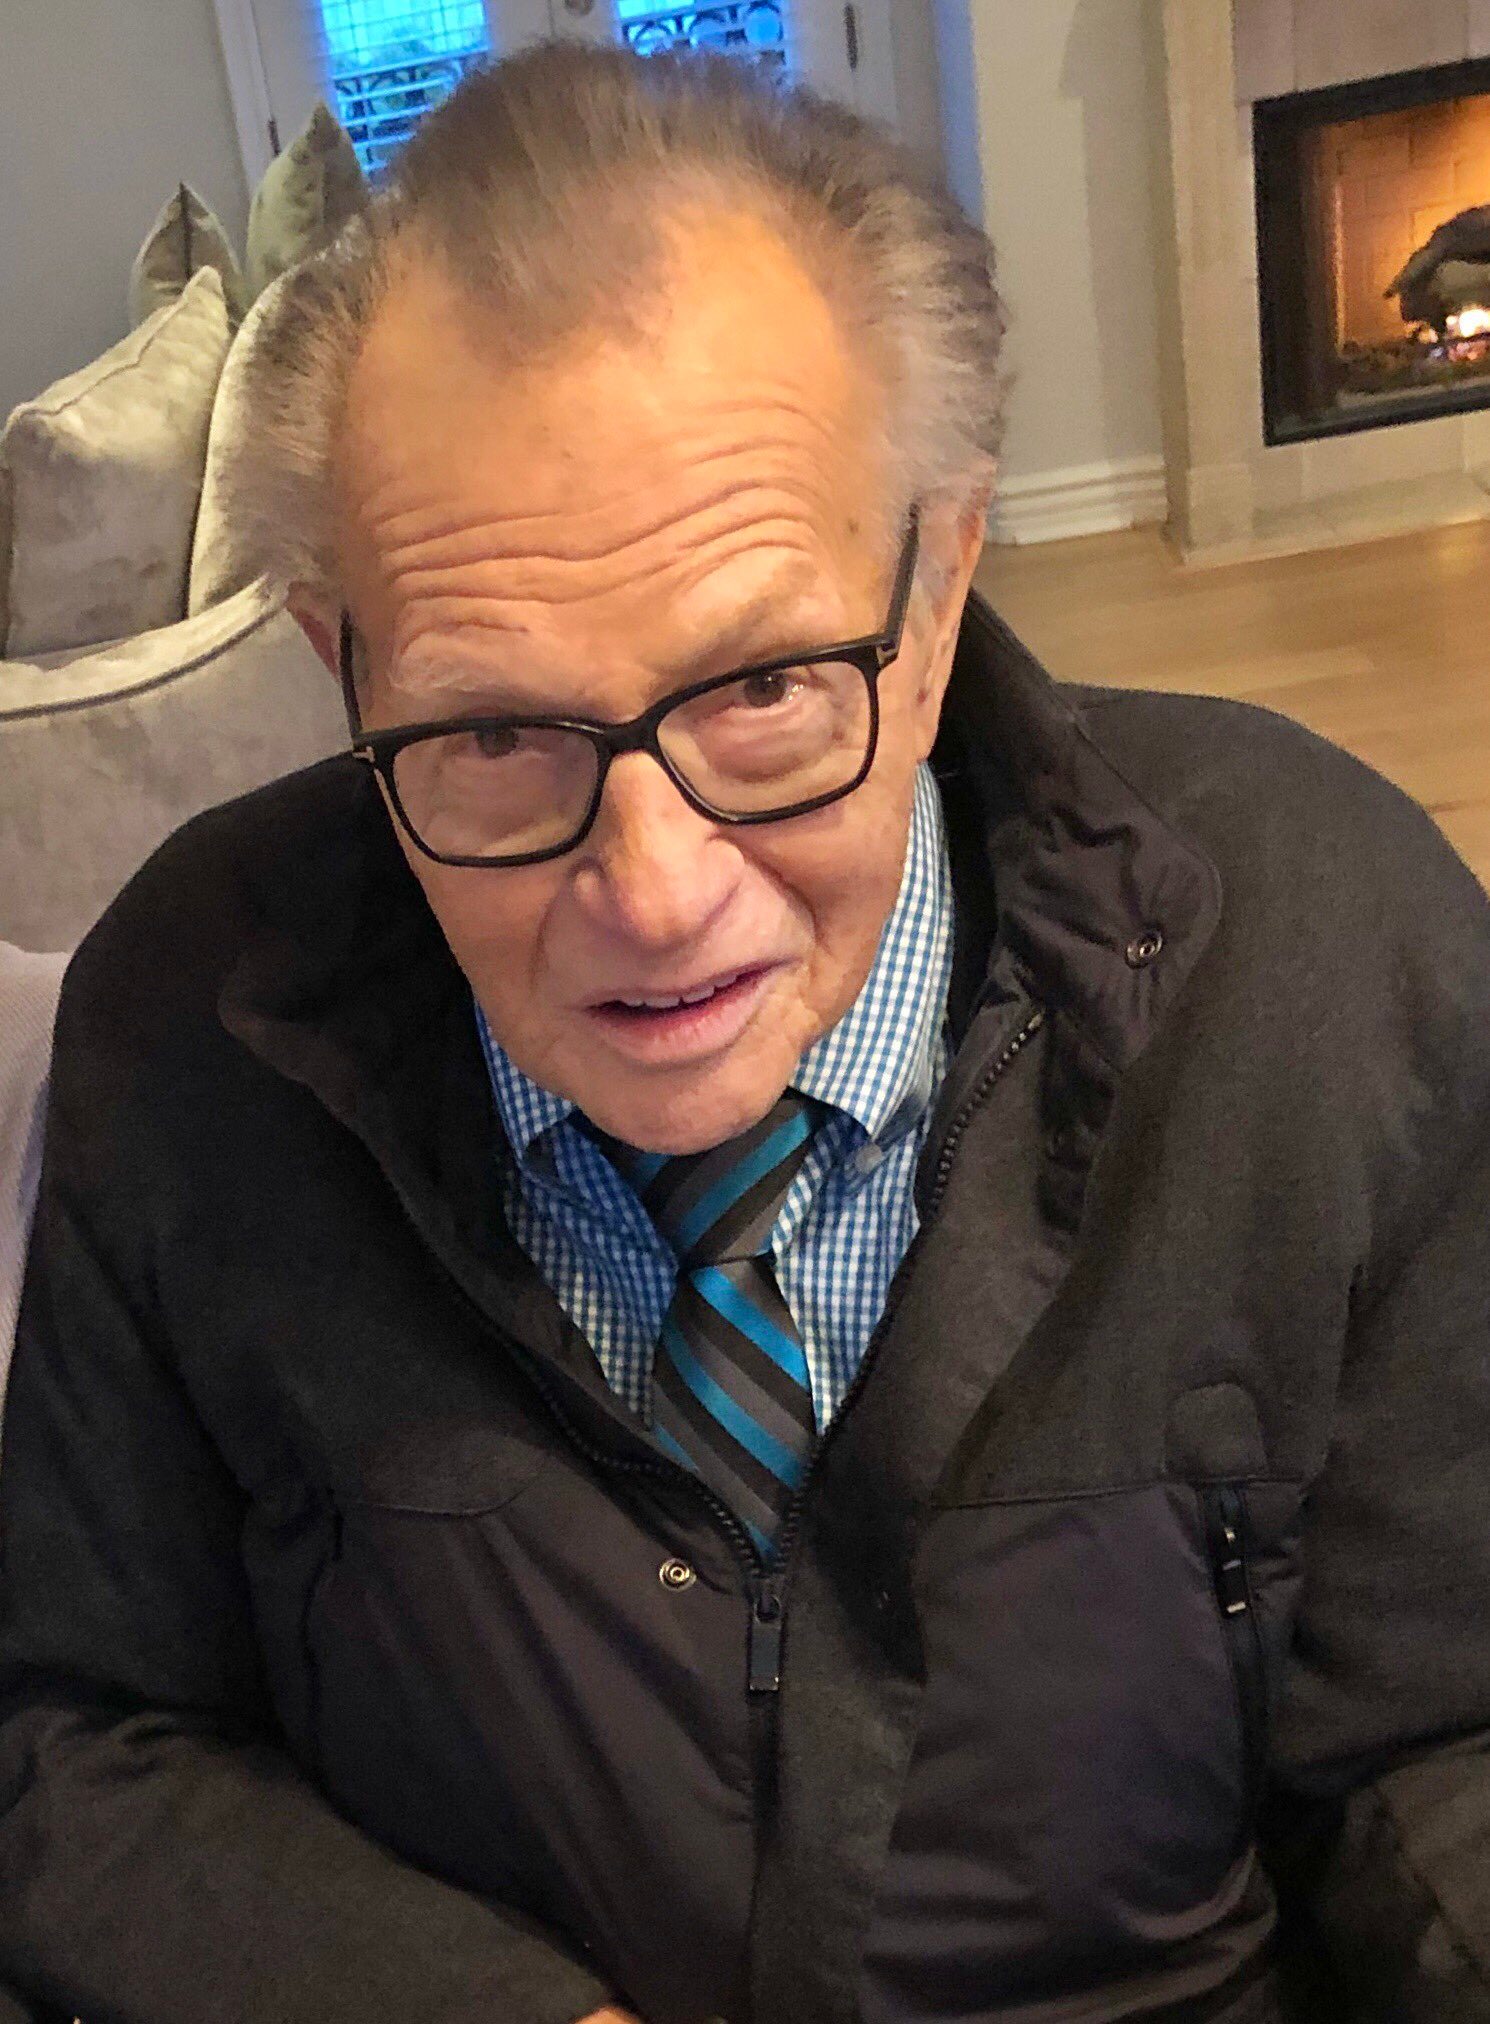 Larry King in hospital for COVID-19 – report